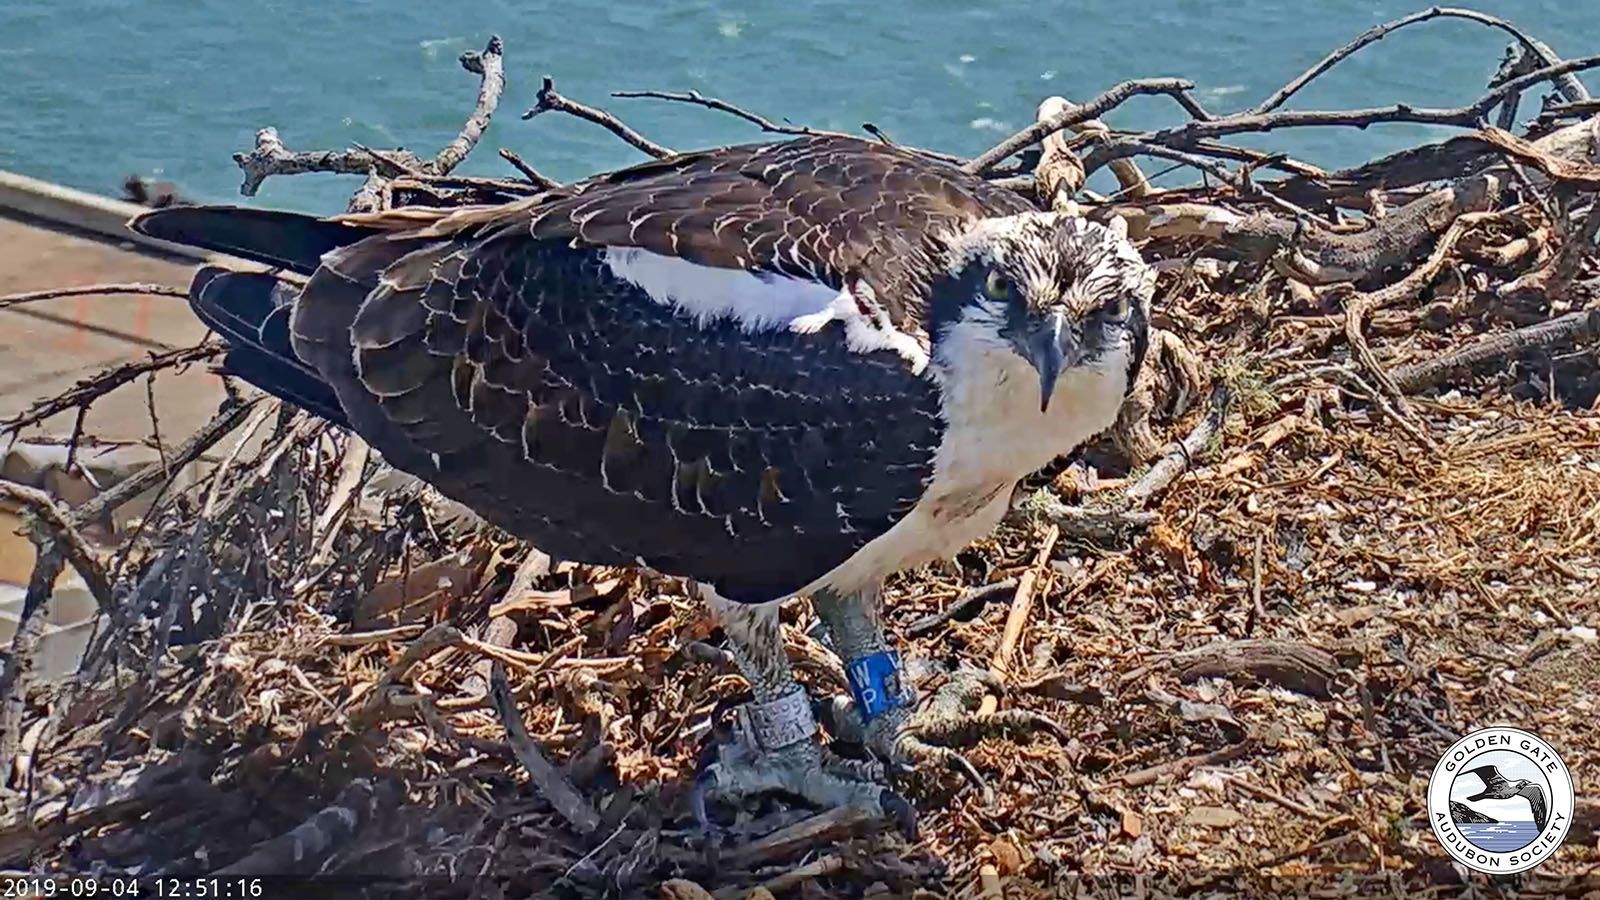 2020 juvenile Peace-up appeared on the nest several weeks after he had been seen on the nest, and was later spotted in Corte Madera, ten miles from the nest.